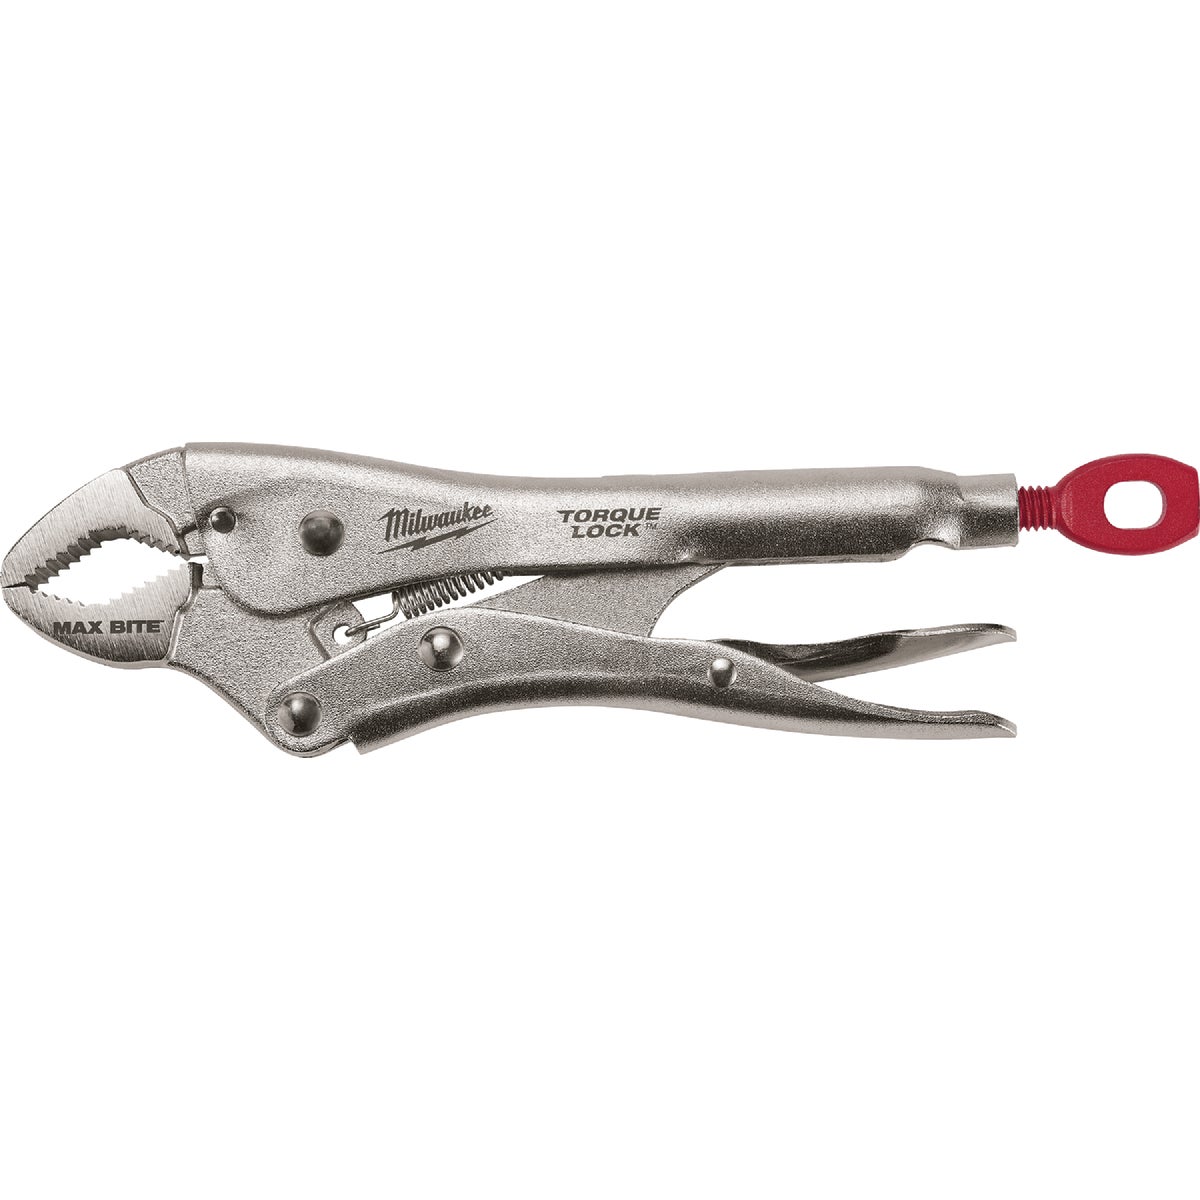 Item 303685, Torque lock MAXBITE locking pliers deliver 3 times more gripping force and 